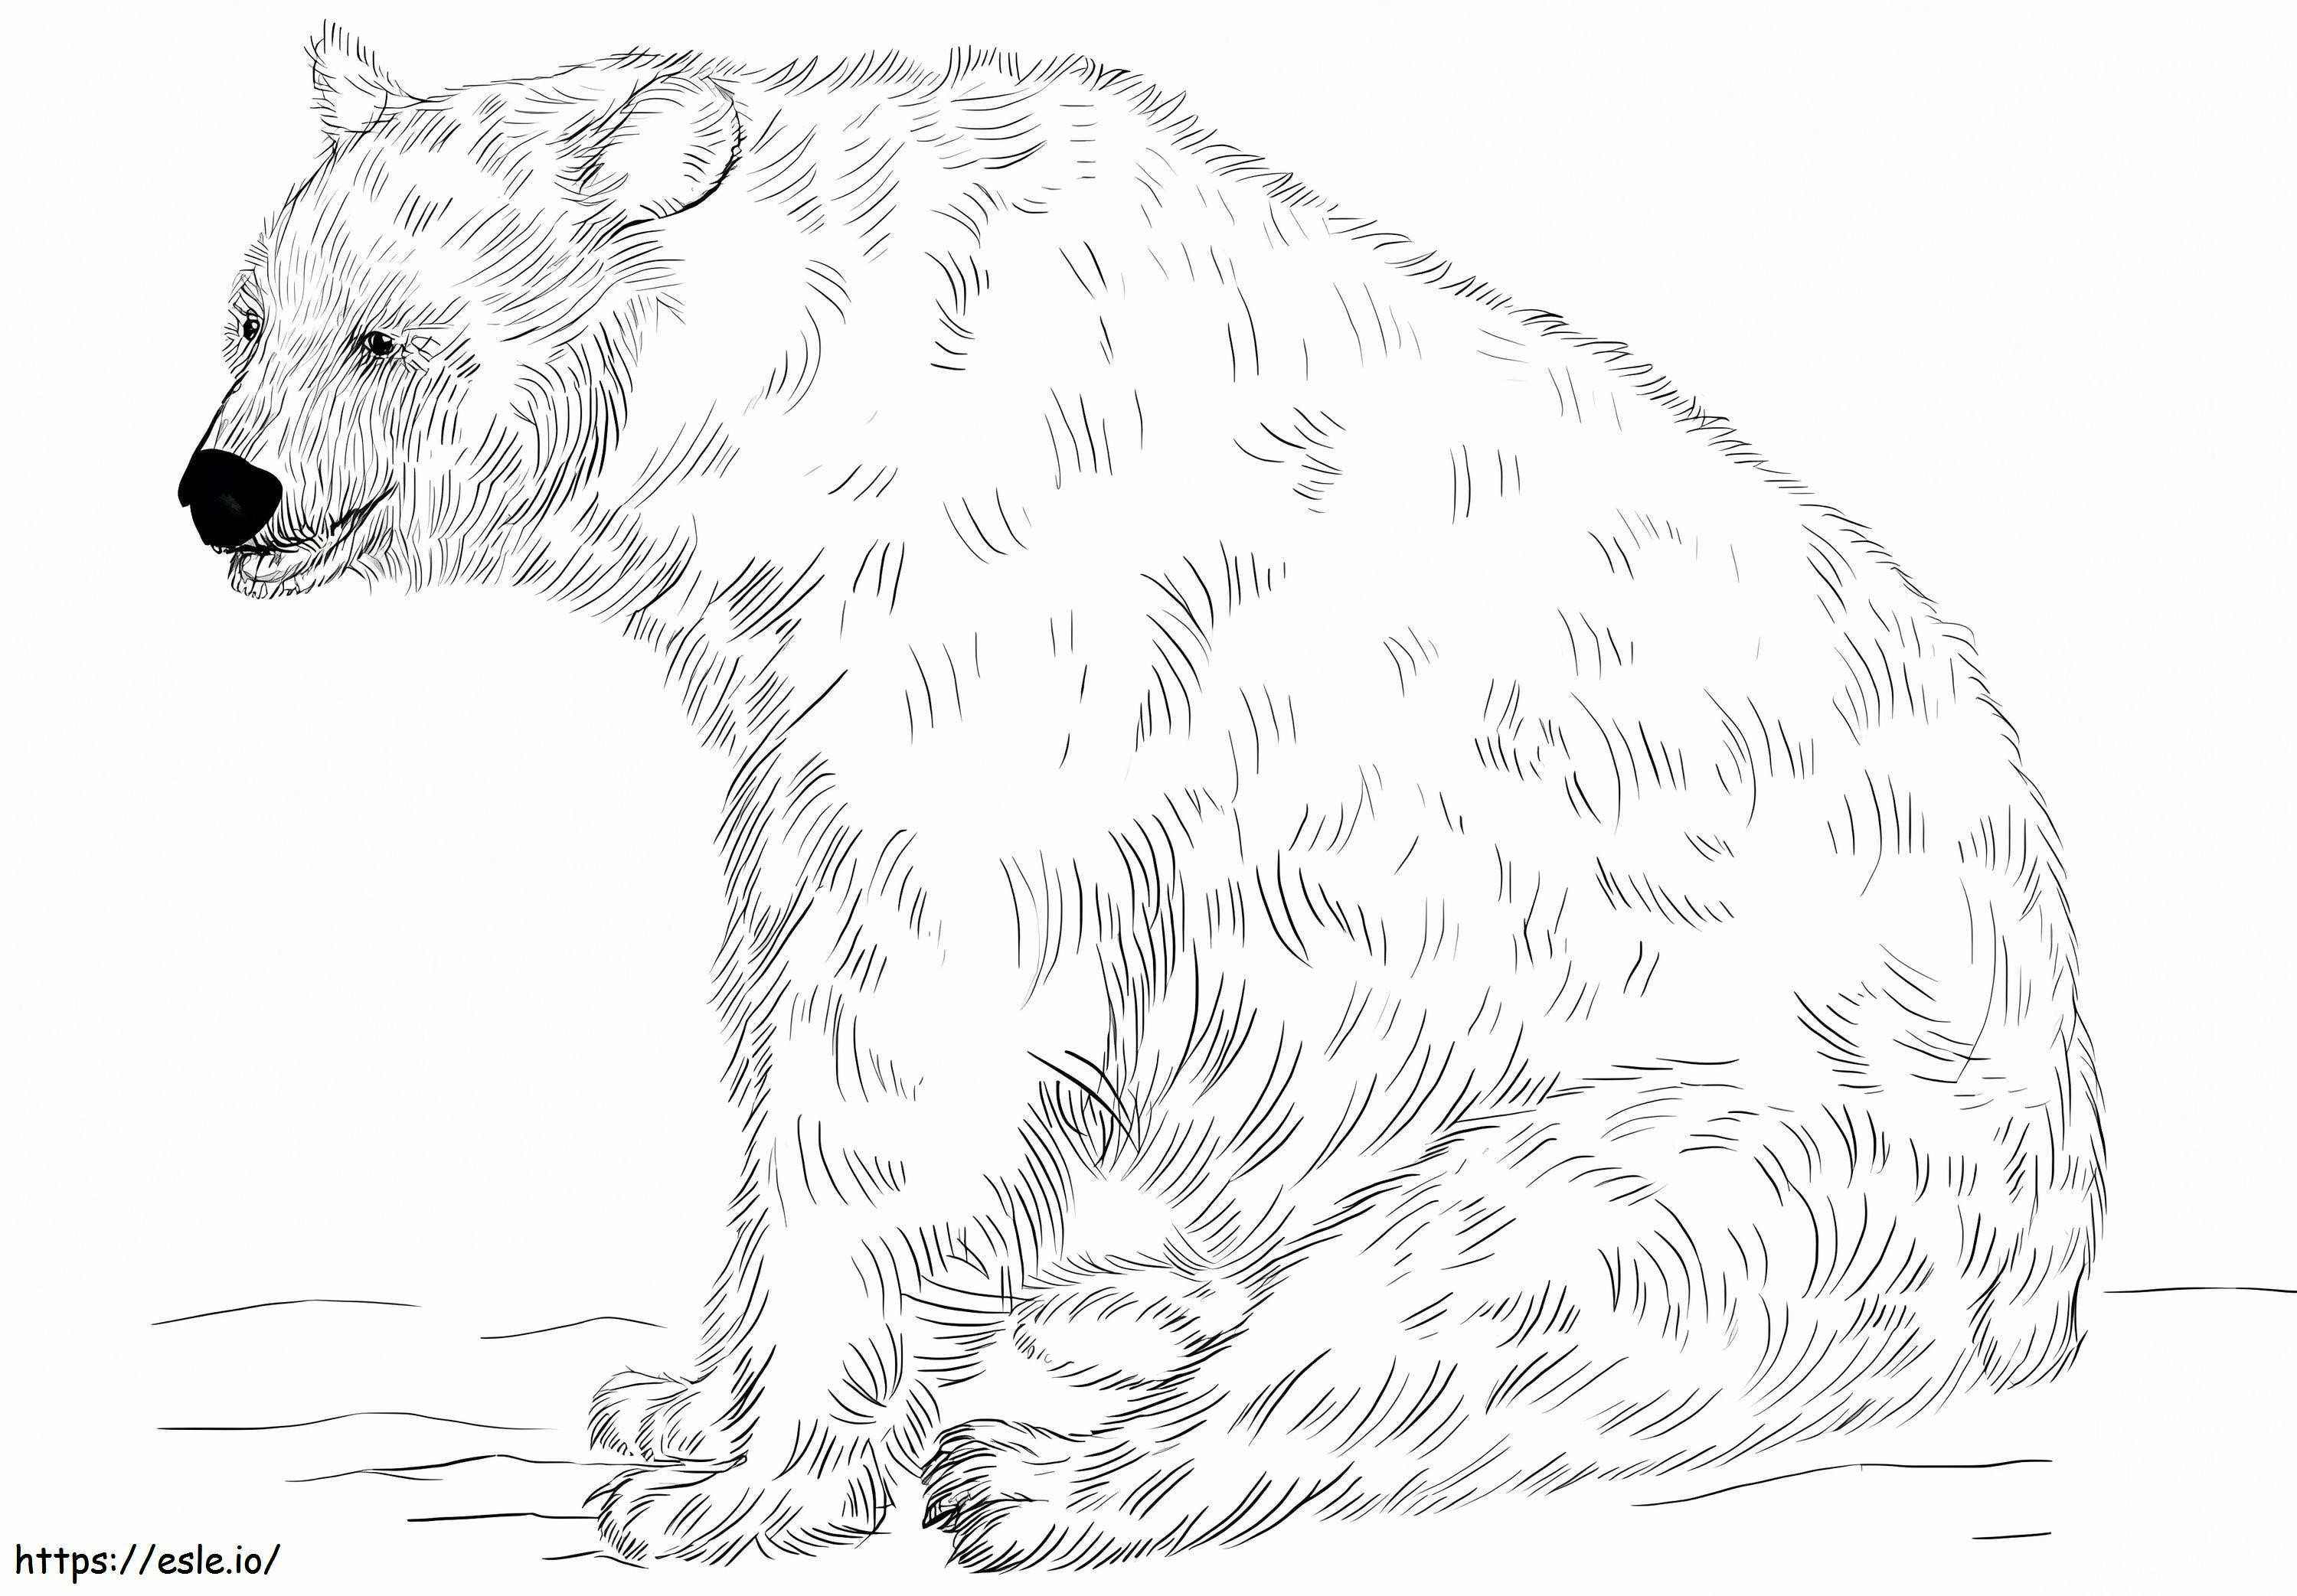 Black Bear Sitting coloring page